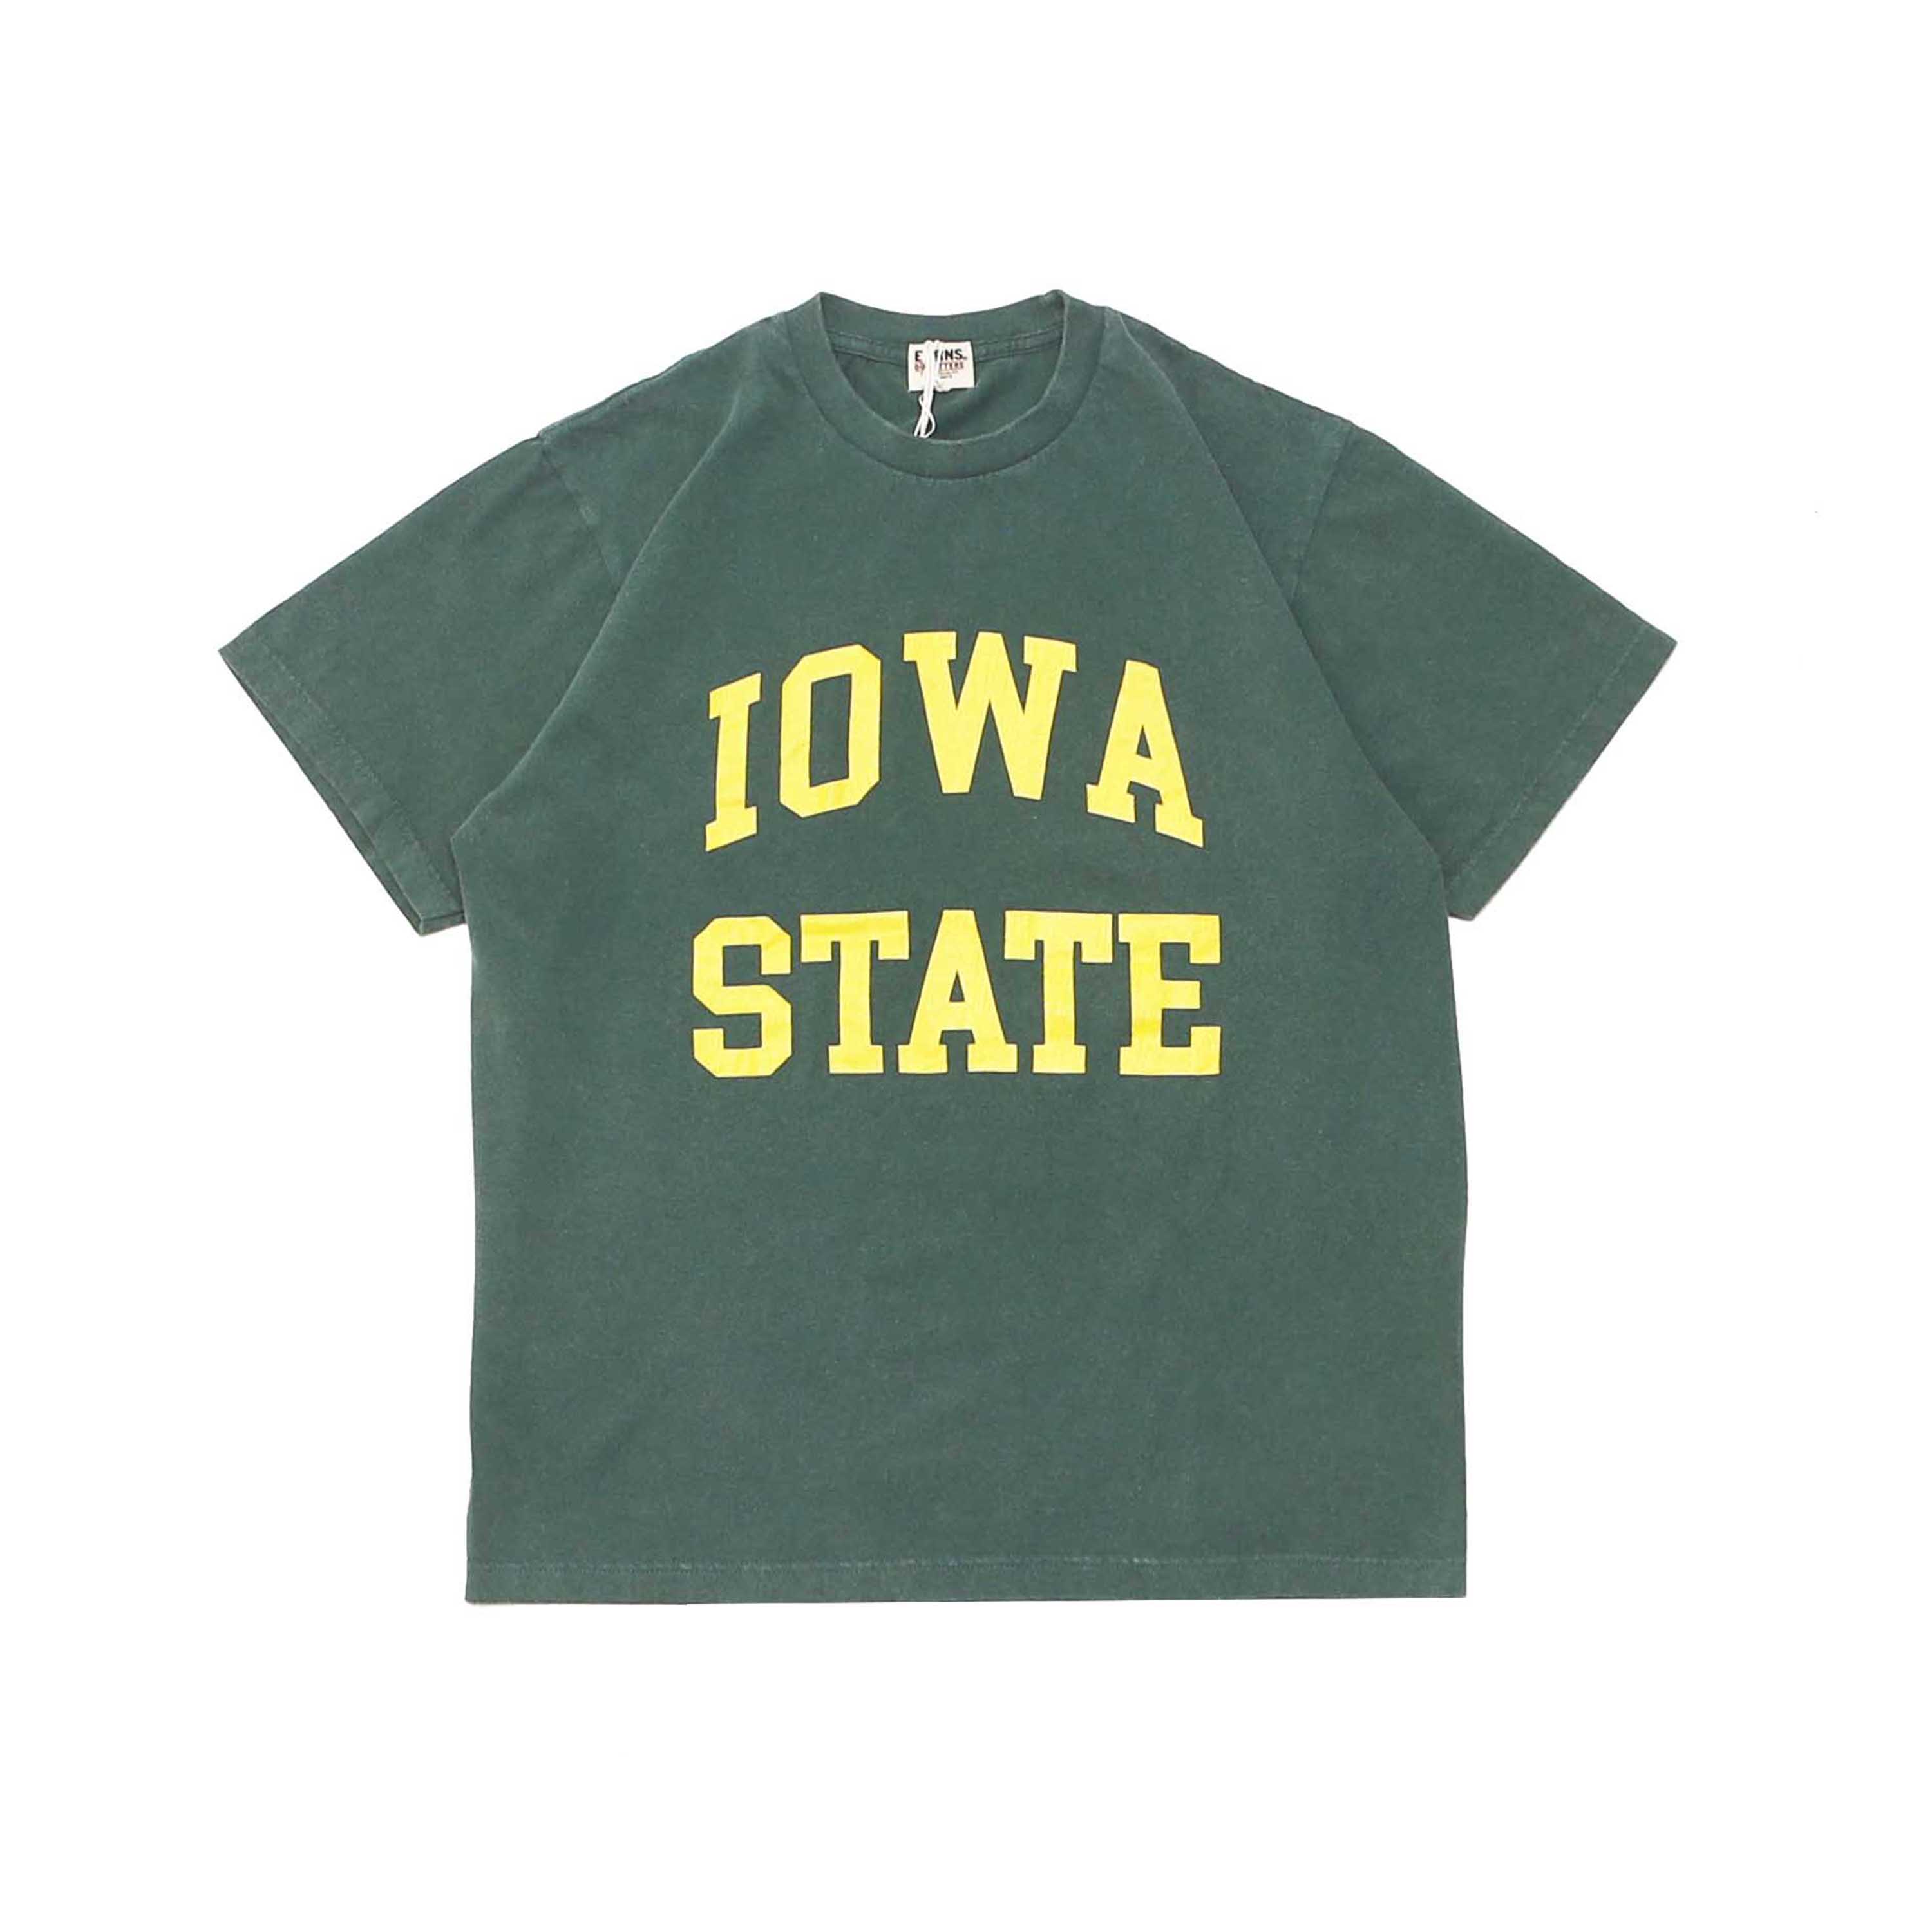 RE:PRO S/S PT TEE - IOWA STATE GREEN(BR-24156)